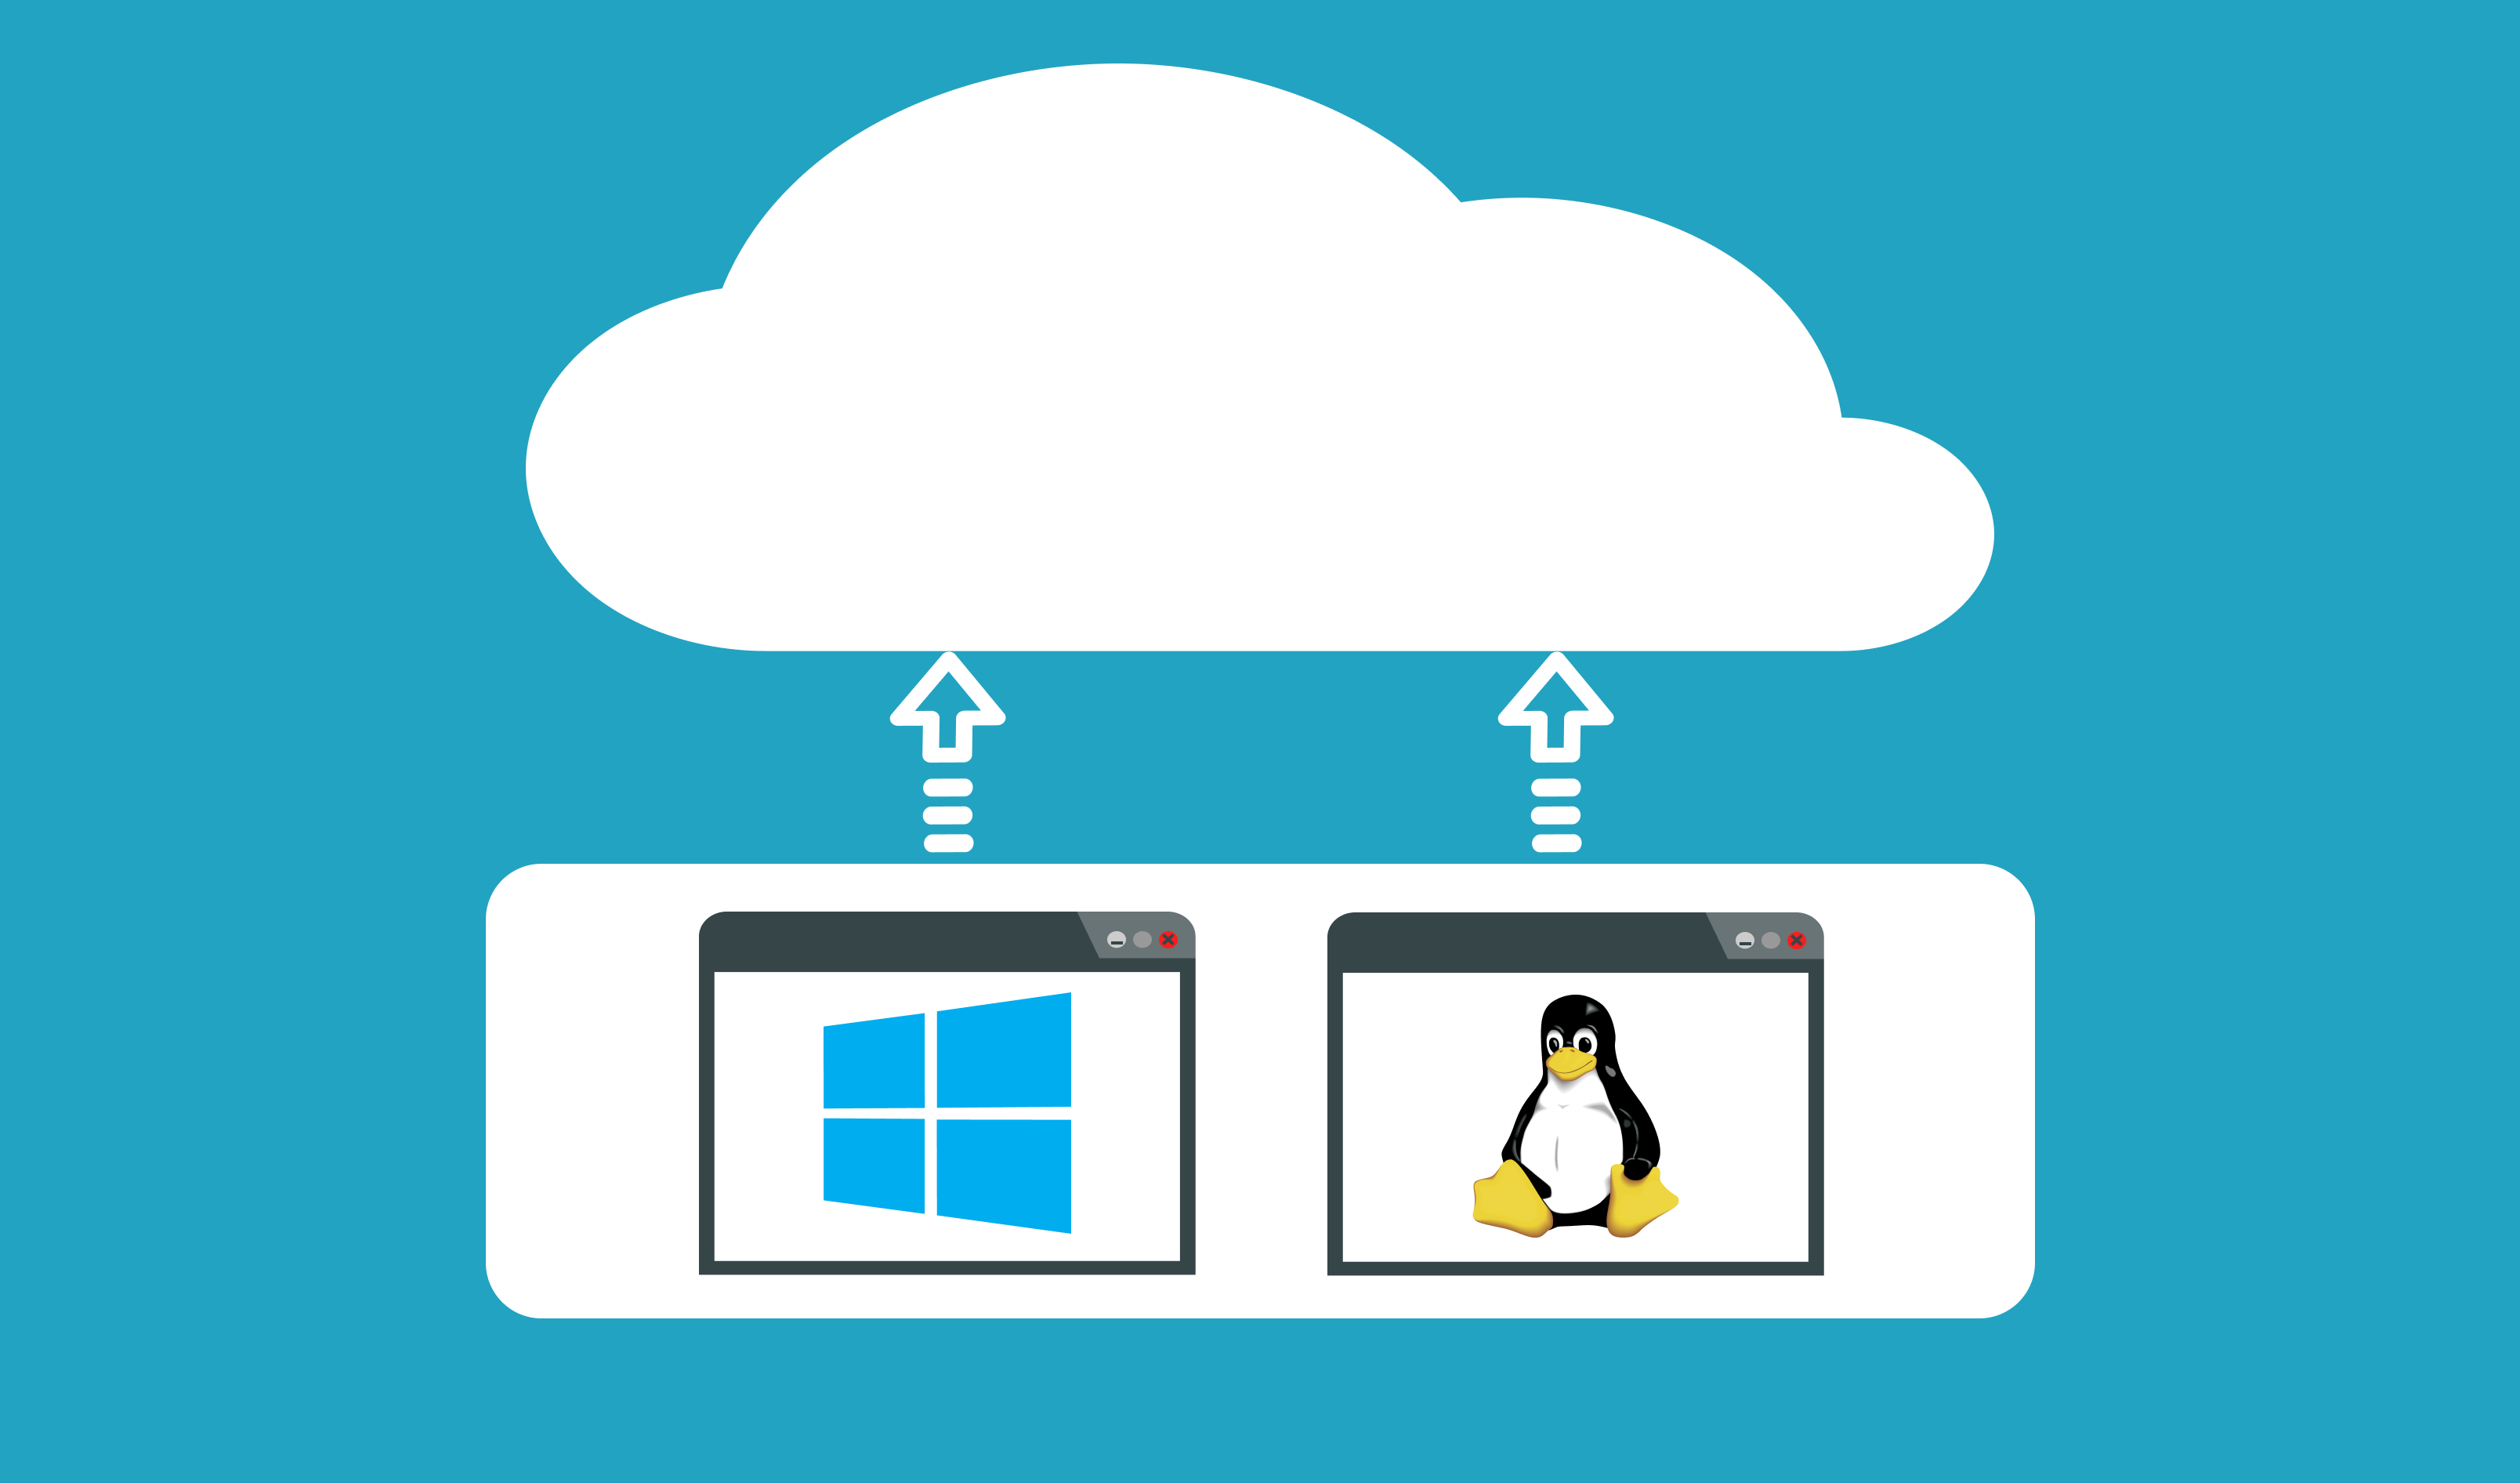 Why migrate legacy desktop apps to the cloud?